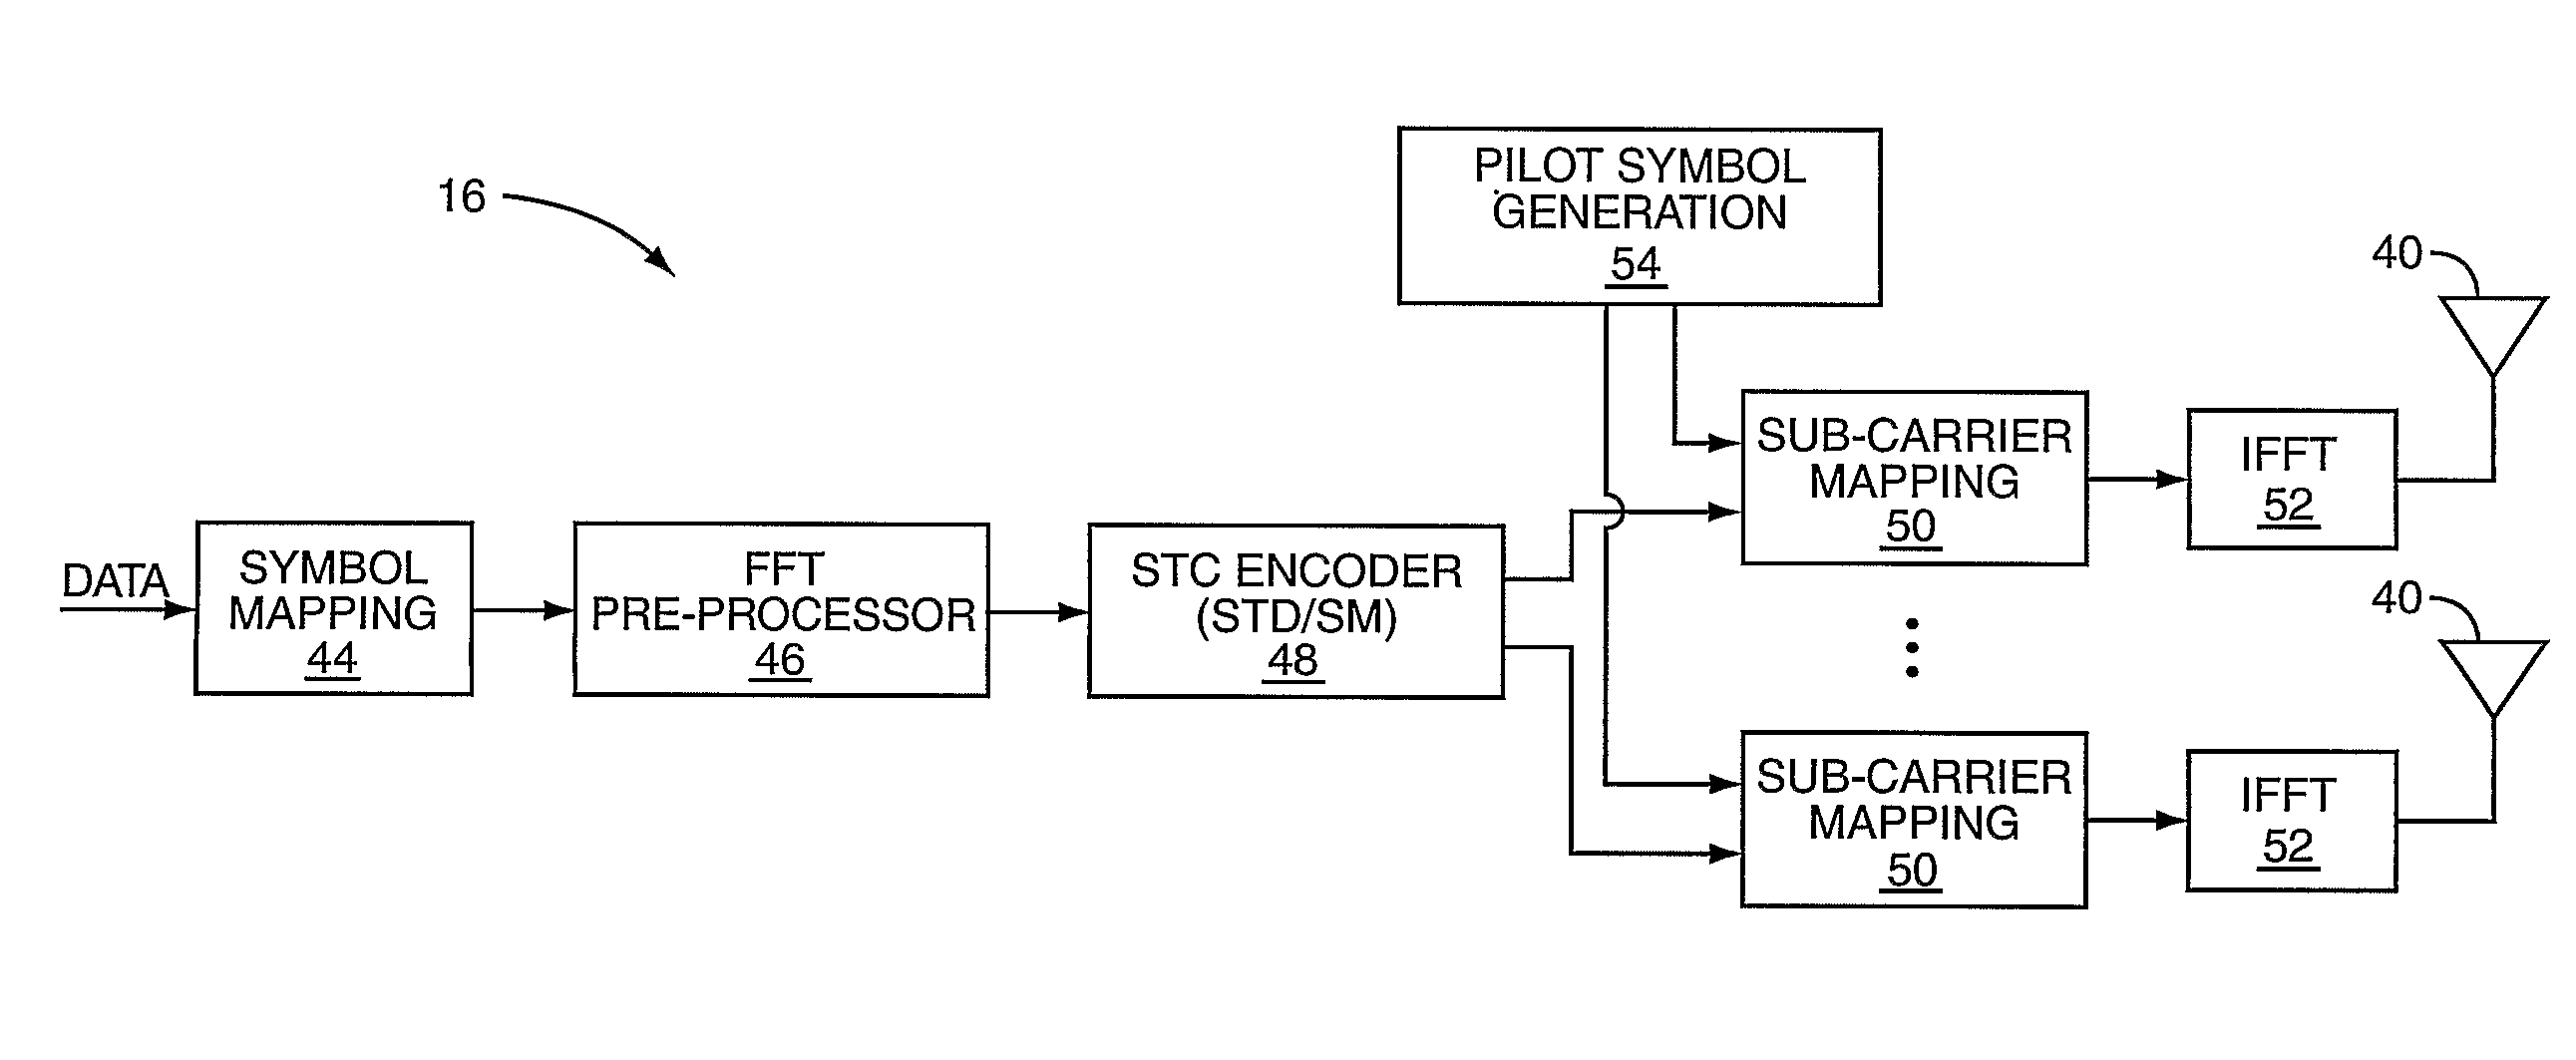 Pilot scheme for a MIMO communication system